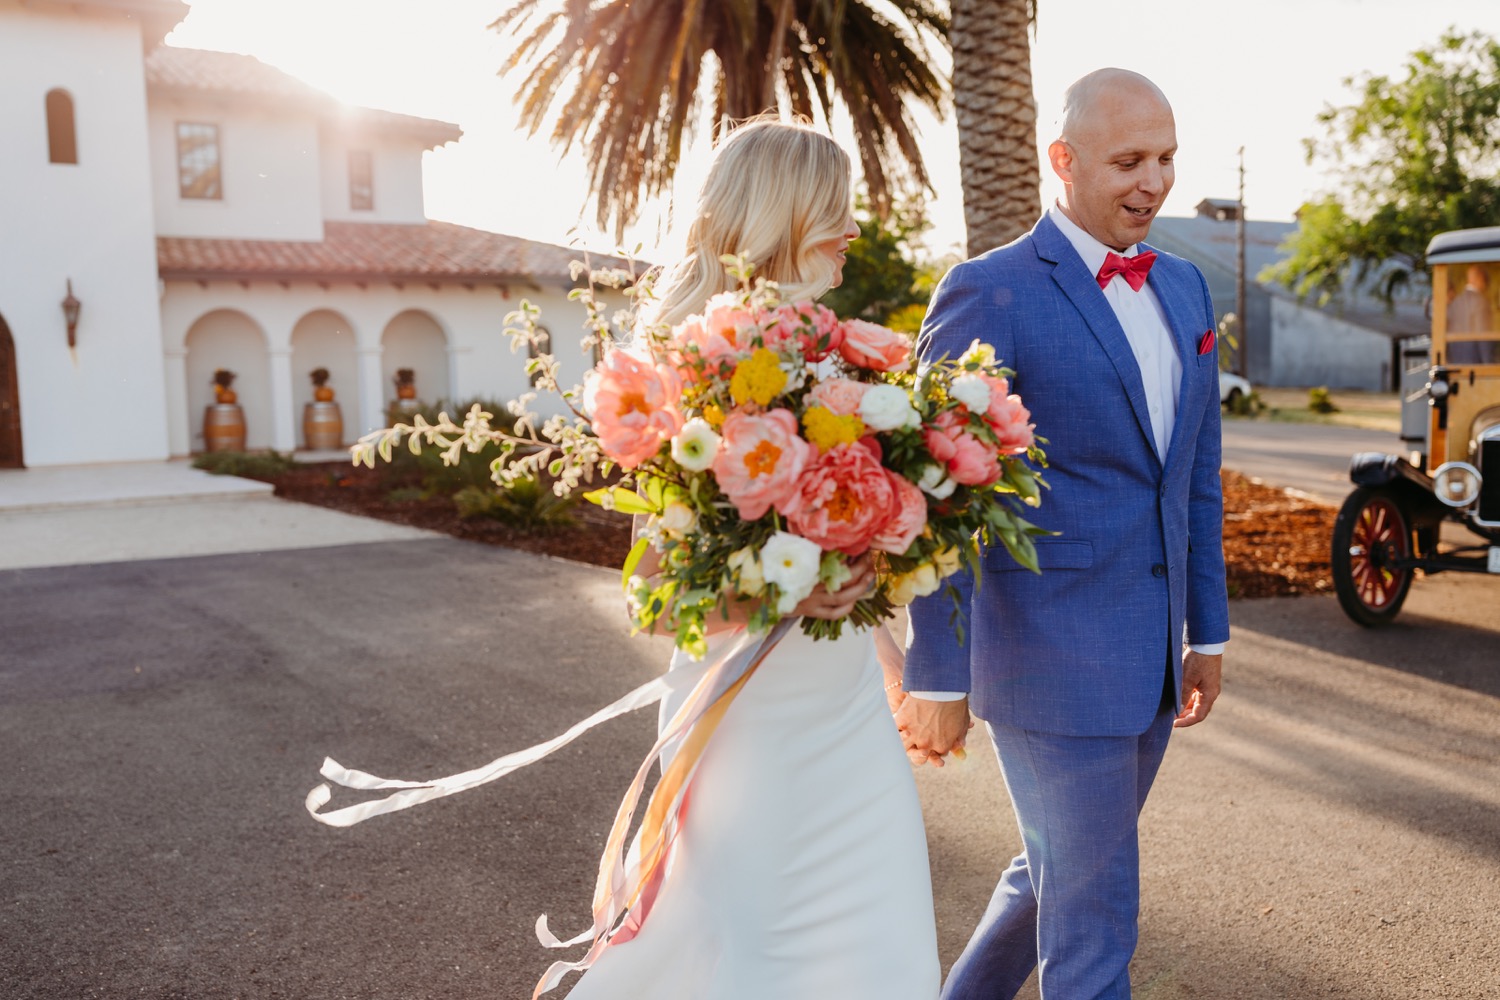 Bride holding her spring colored bouquet walking with her groom during sunset. Spanish style building in the back.